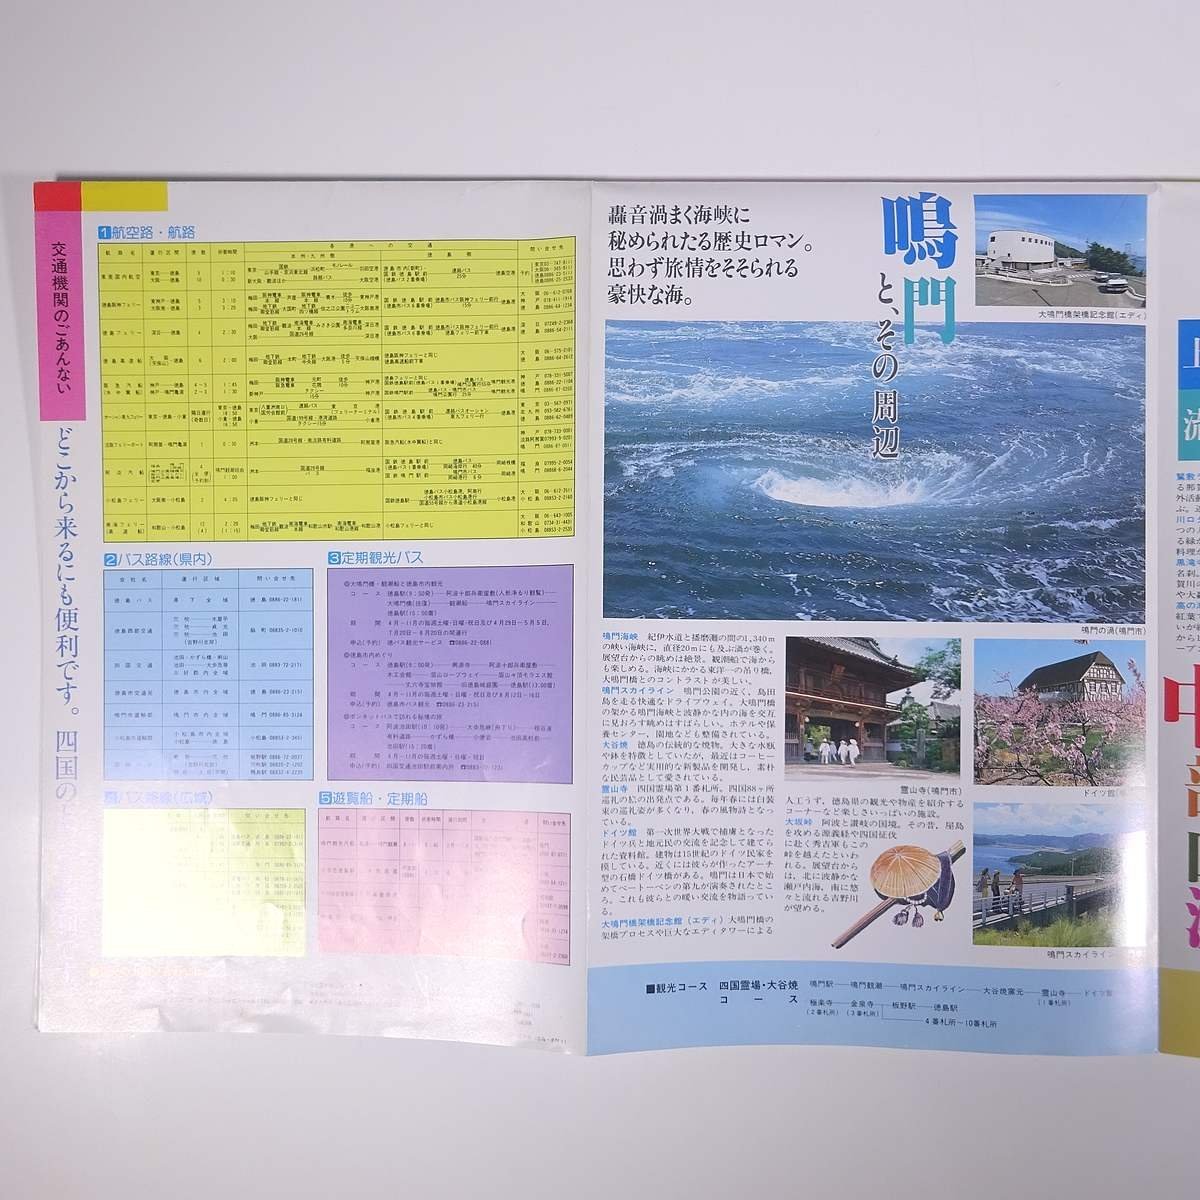 [ map ] Tokushima prefecture tourist attraction map OUR Tokushima size 61cm×80cm Tokushima publish corporation issue year unknown geography map Tokushima prefecture travel sightseeing 